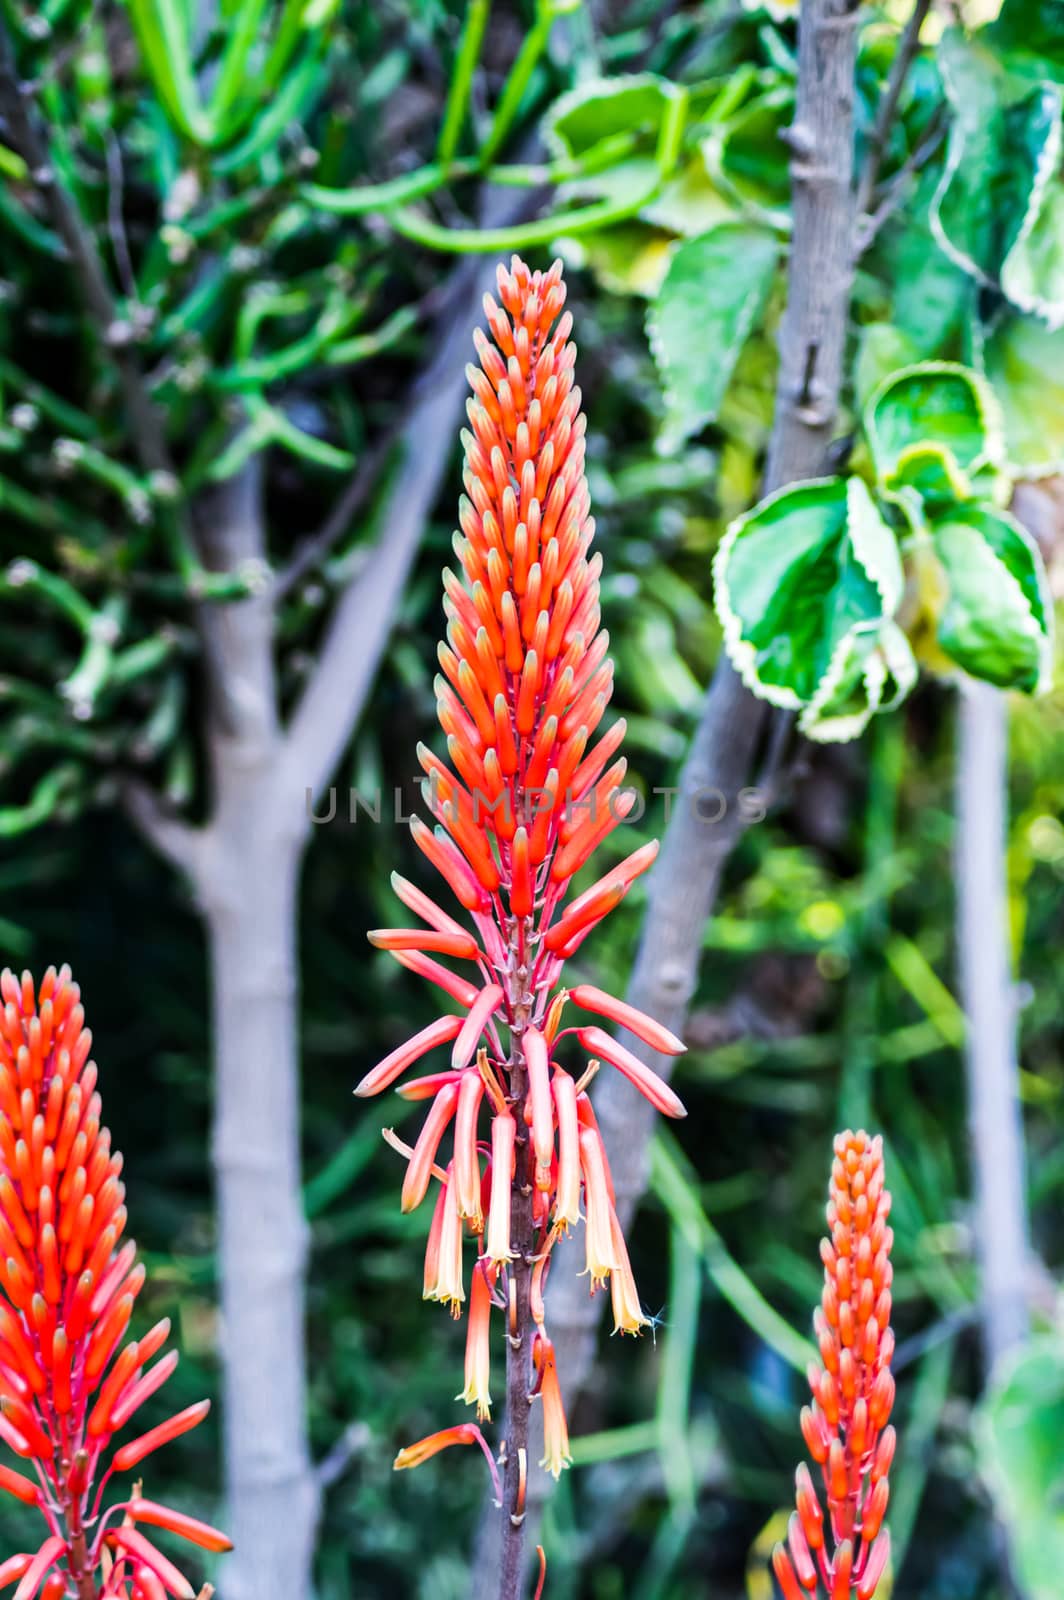 The Aloe plant is known for its medical properties, but not everyone knows its aesthetic characteristics well. These photos show the colors of Aloe Arborescens in a garden in Nairobi Kenya